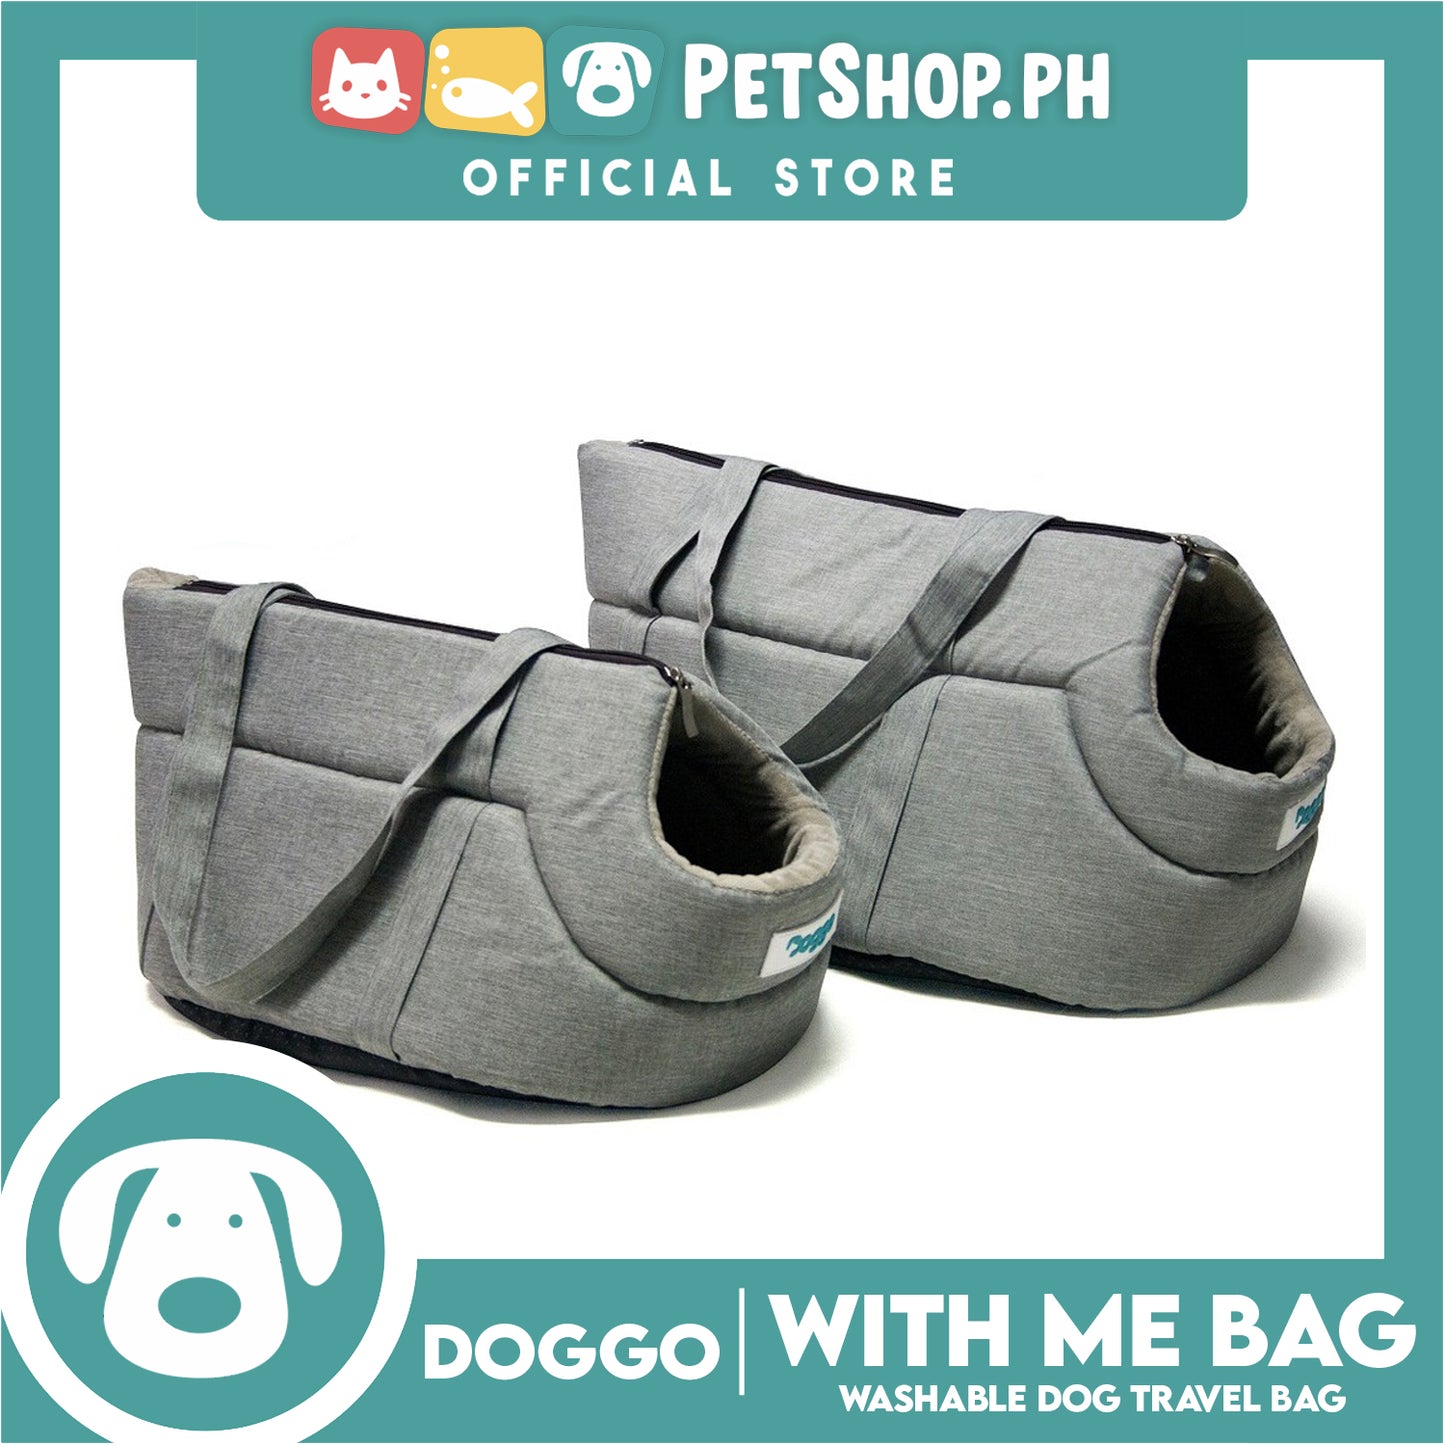 Doggo with me Bag Breathable Head-Out Dog Travel Carrier Bag (Large)